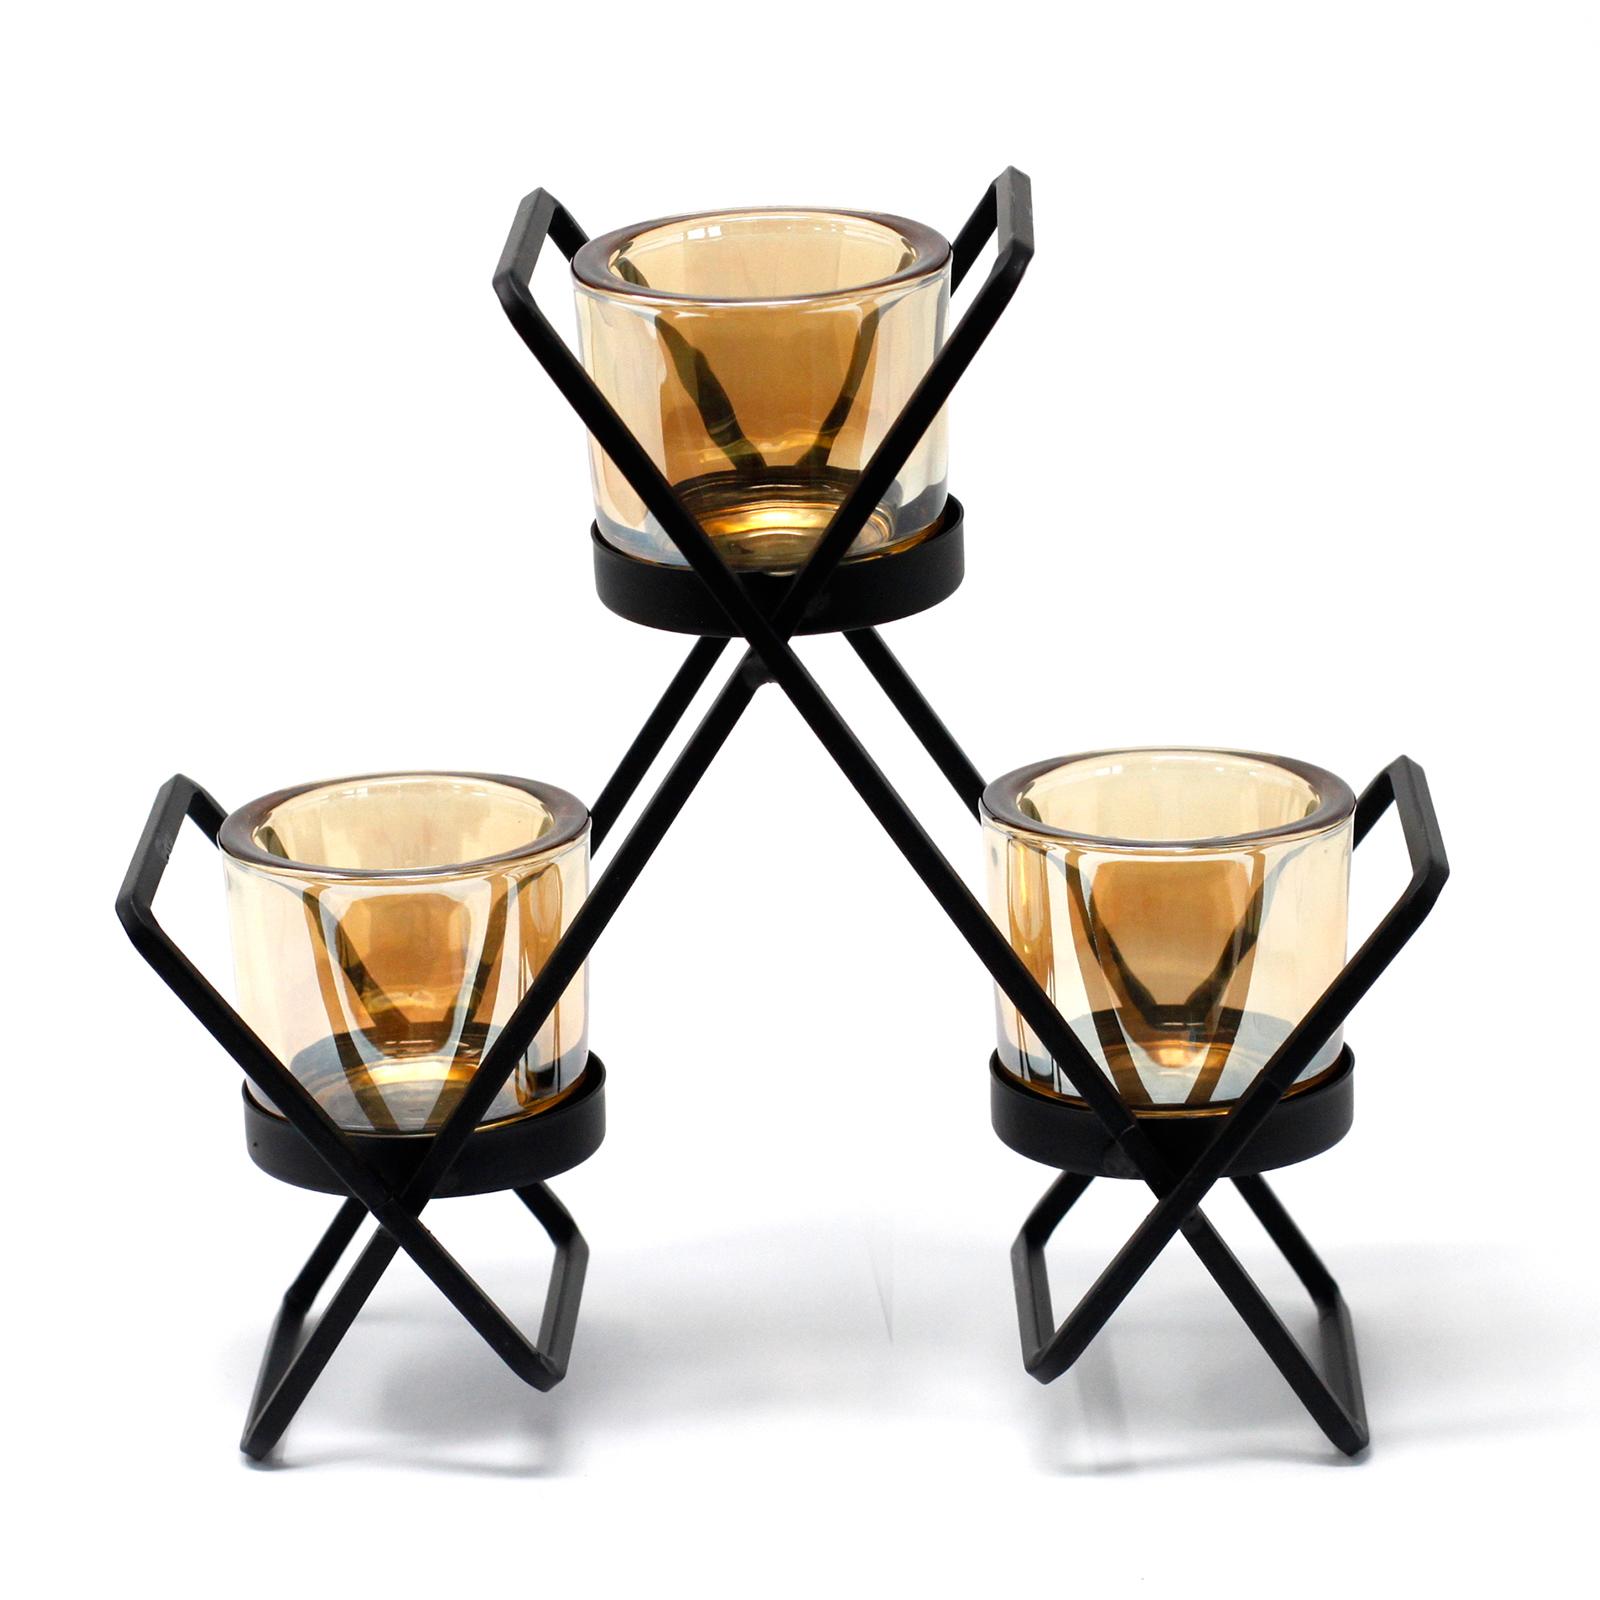 Iron Votive Candle Holder - 3 Cup Triangle